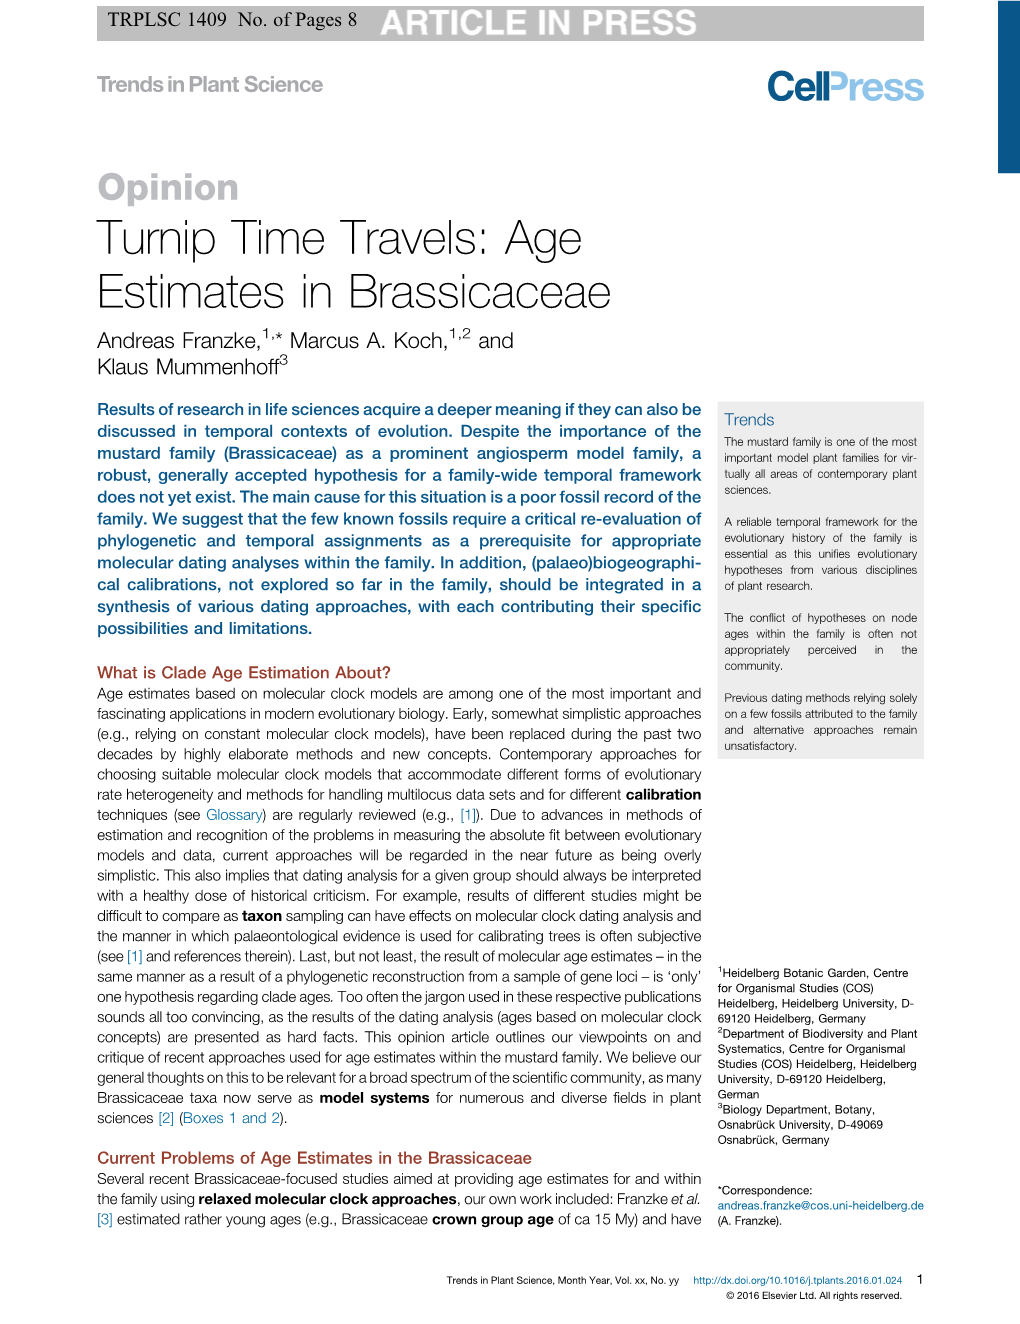 Turnip Time Travels: Age Estimates in Brassicaceae Andreas Franzke,1,* Marcus A